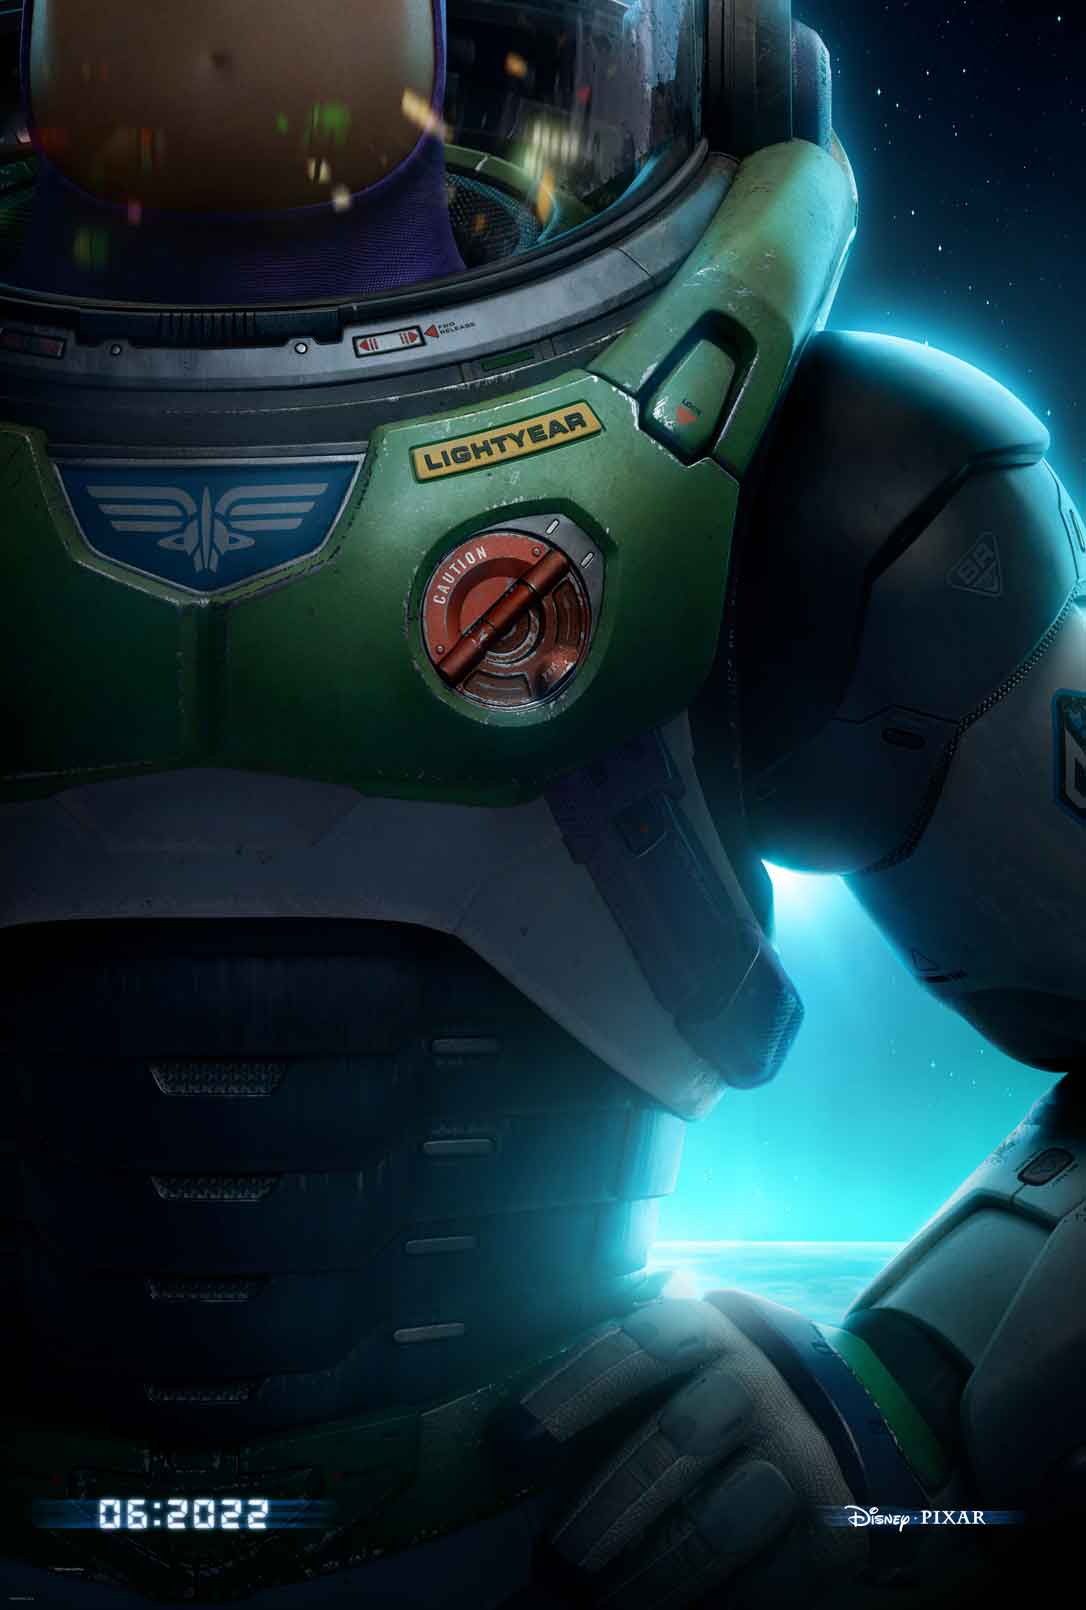 Pixar releases teaser for Buzz Lightyear origin story featuring